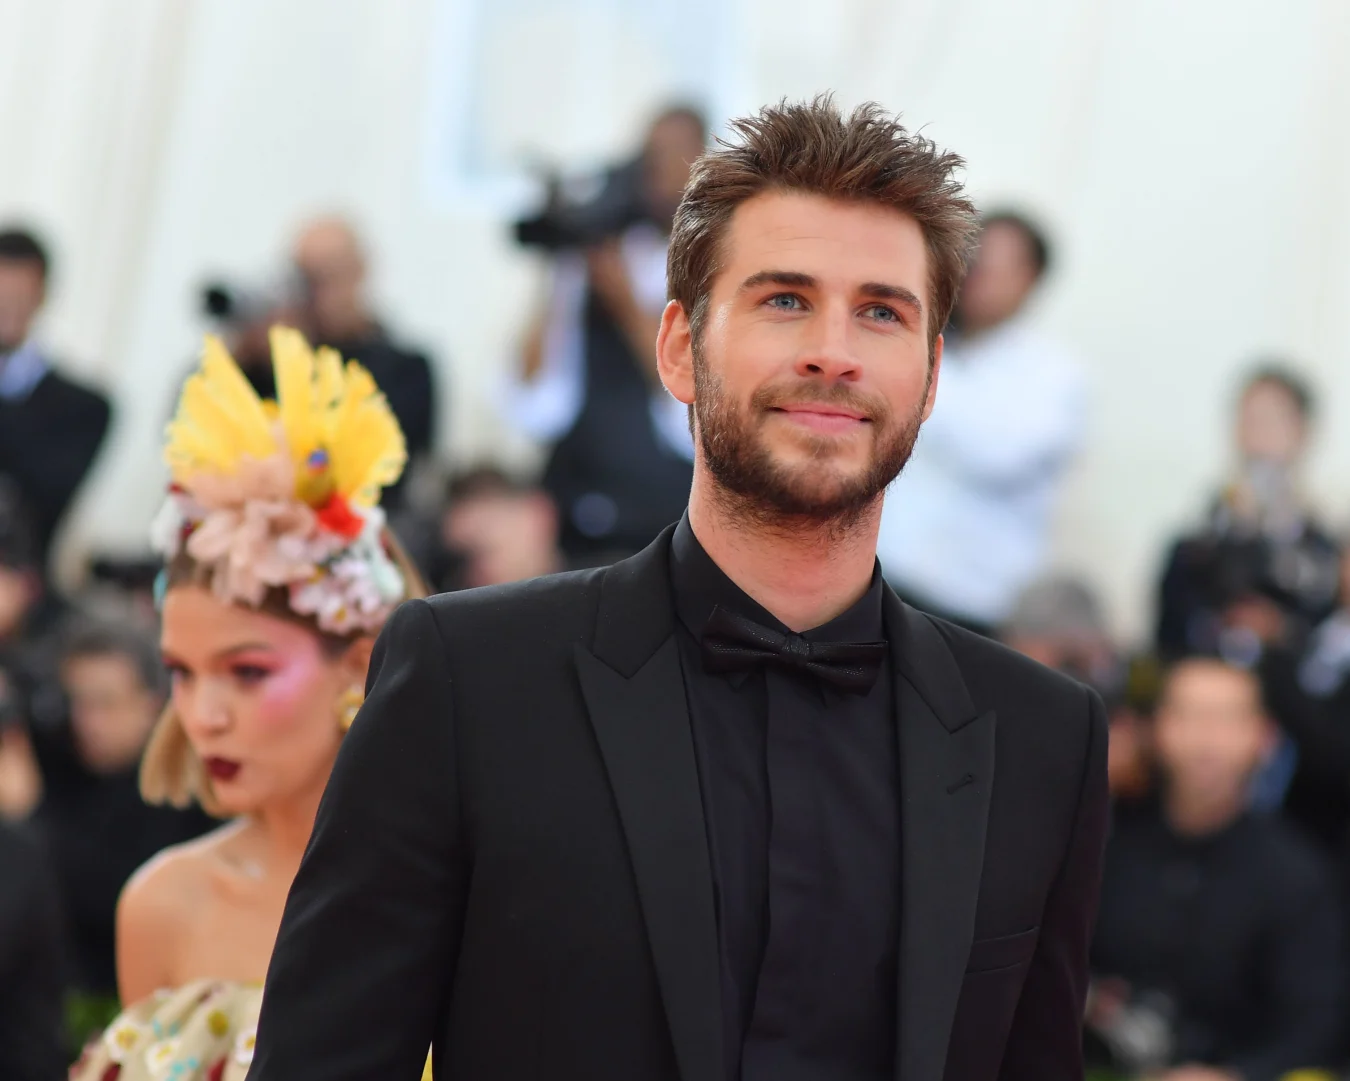 Liam Hemsworth arrives for the 2019 Met Gala at the Metropolitan Museum of Art on May 6, 2019 in New York.  - The Gala raises funds for the Costume Institute of the Metropolitan Museum of Arts.  The theme of the 2019 Gala is Camp: Notes on Fashion